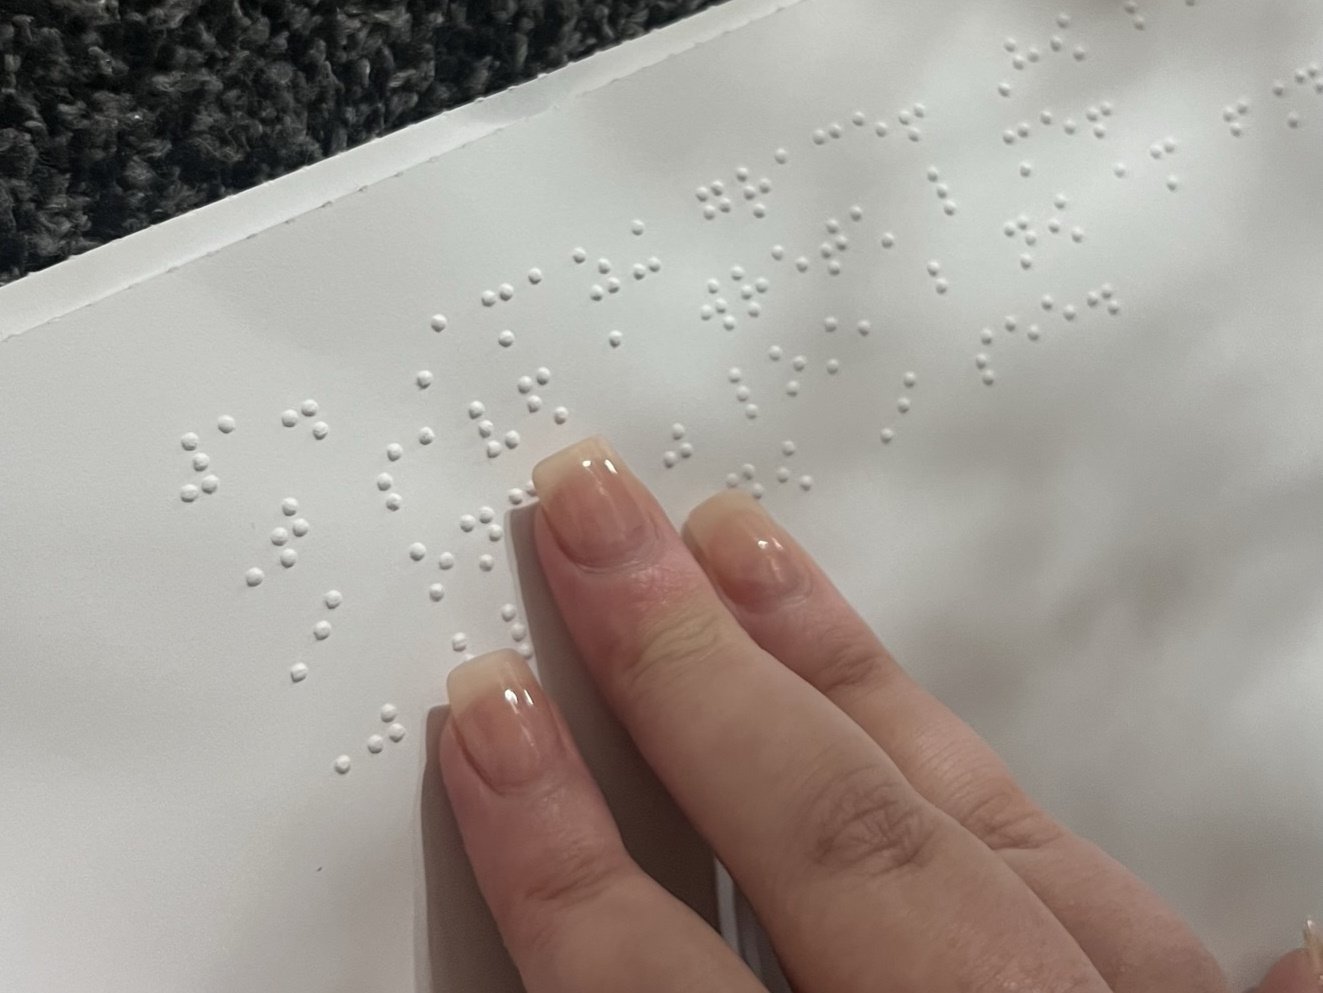 Emily's hand on braille song sheet